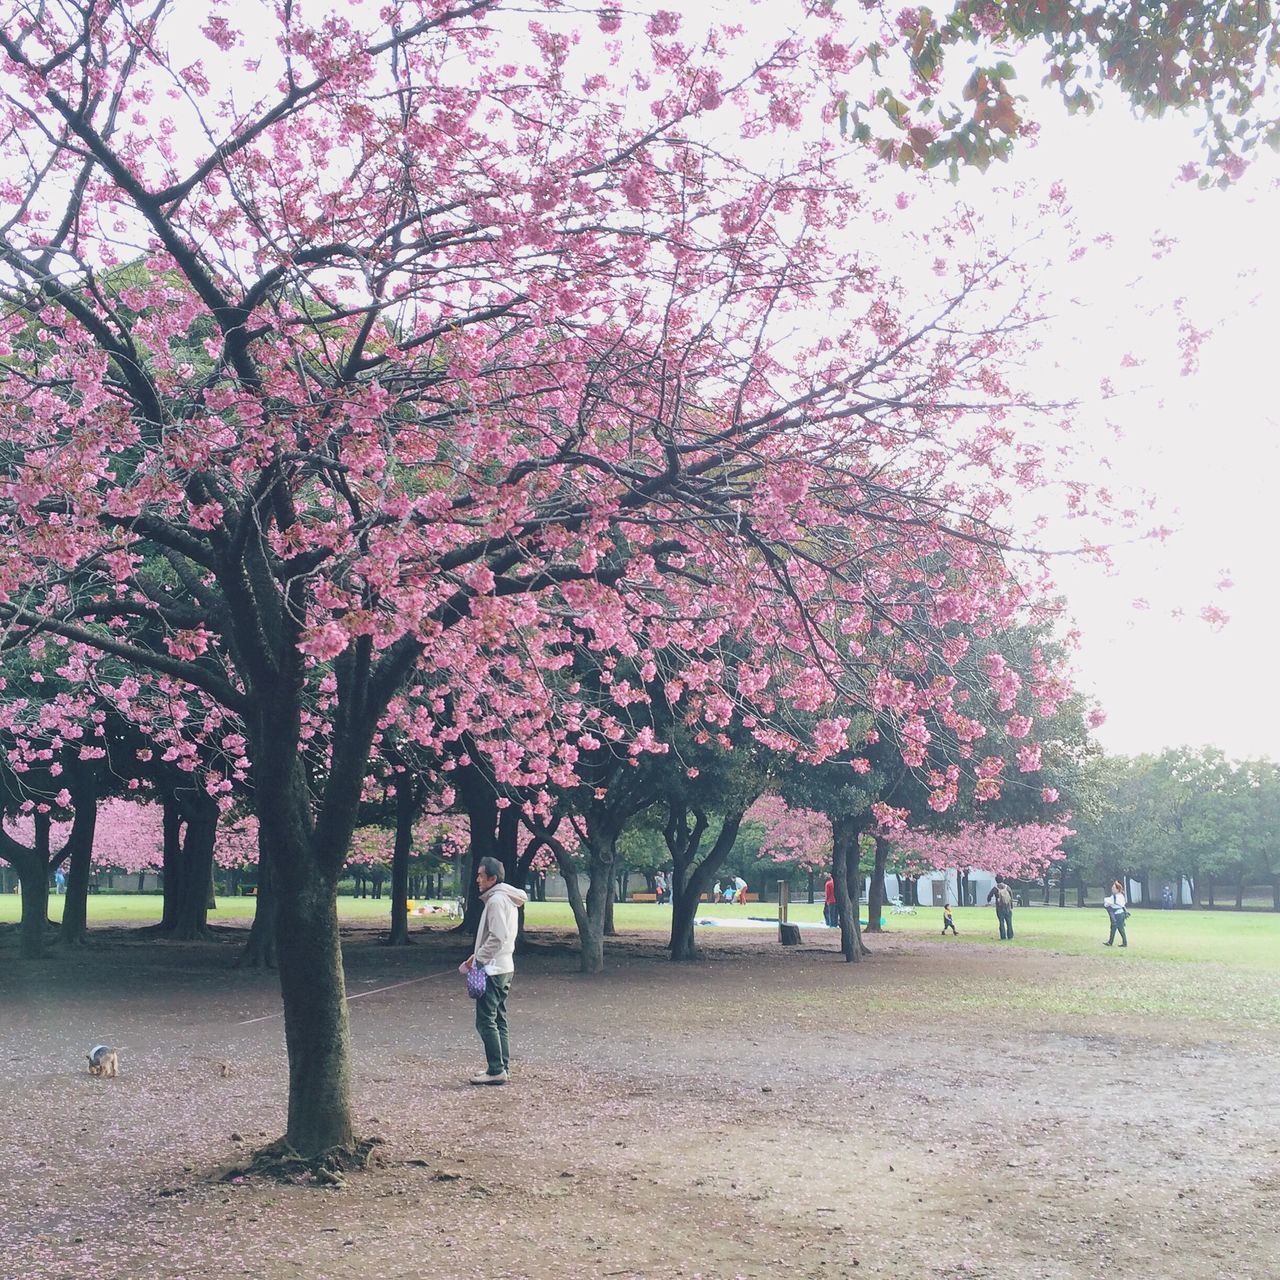 tree, flower, person, lifestyles, growth, leisure activity, park - man made space, branch, beauty in nature, nature, men, walking, pink color, blossom, freshness, large group of people, park, cherry blossom, day